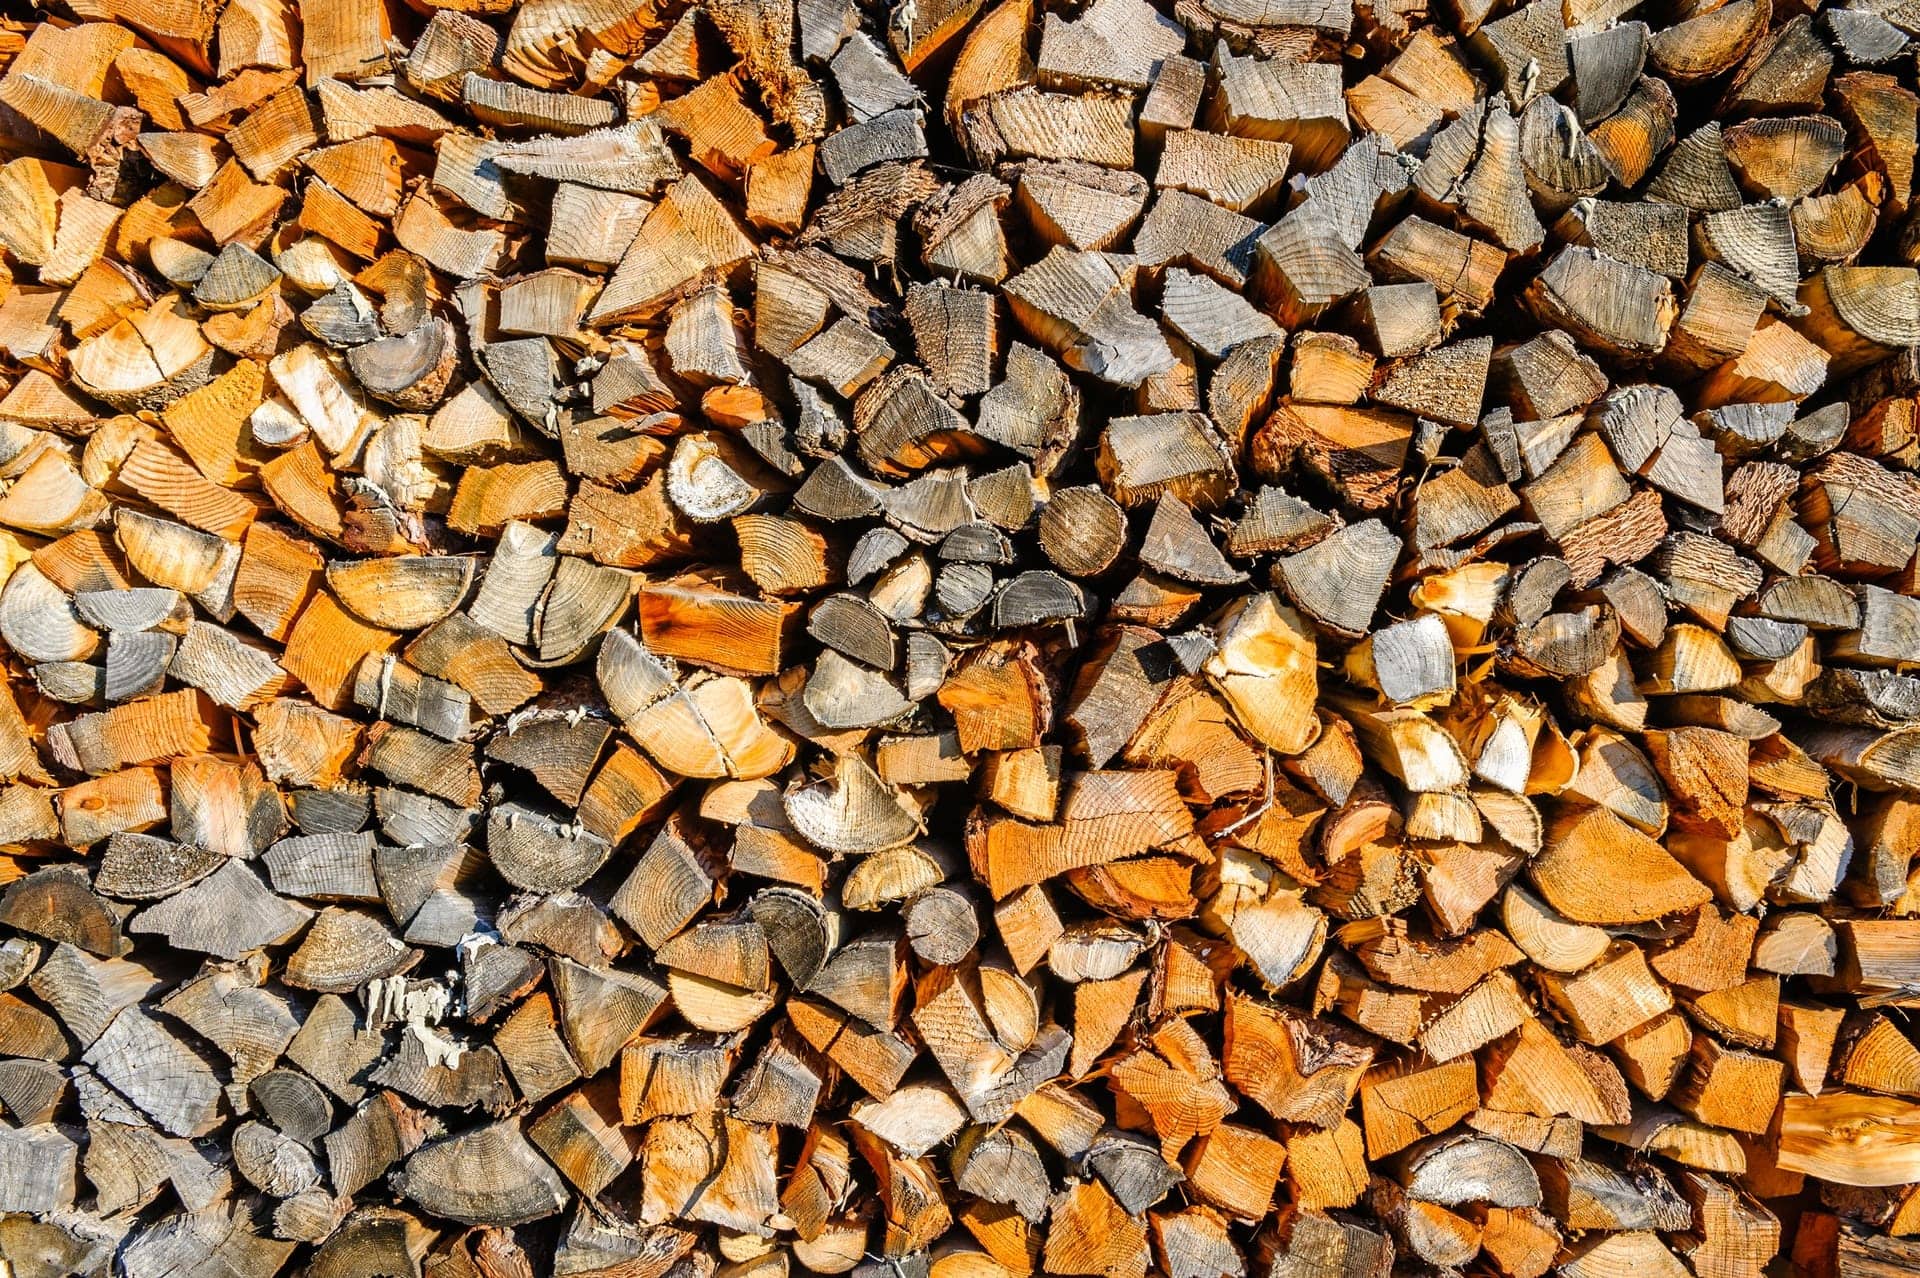 Biomass Boiler Warranty, wood chips used in a Biomass Boiler chopped and stacked neatly